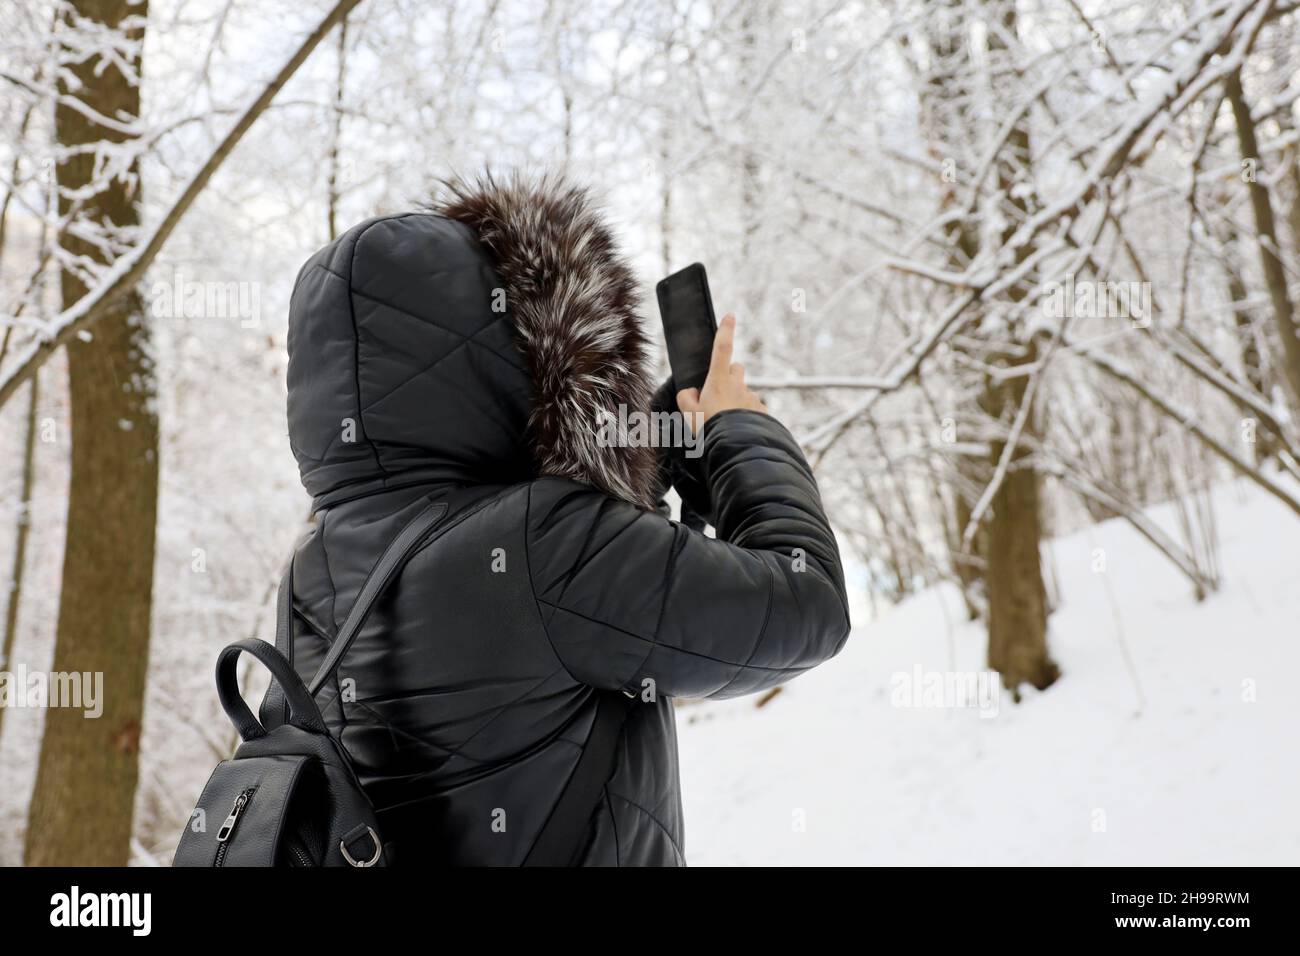 Woman in black coat with fur hood taking pictures of snow nature on a smartphone in the winter forest. Trees after snowfall, leisure at cold weather Stock Photo